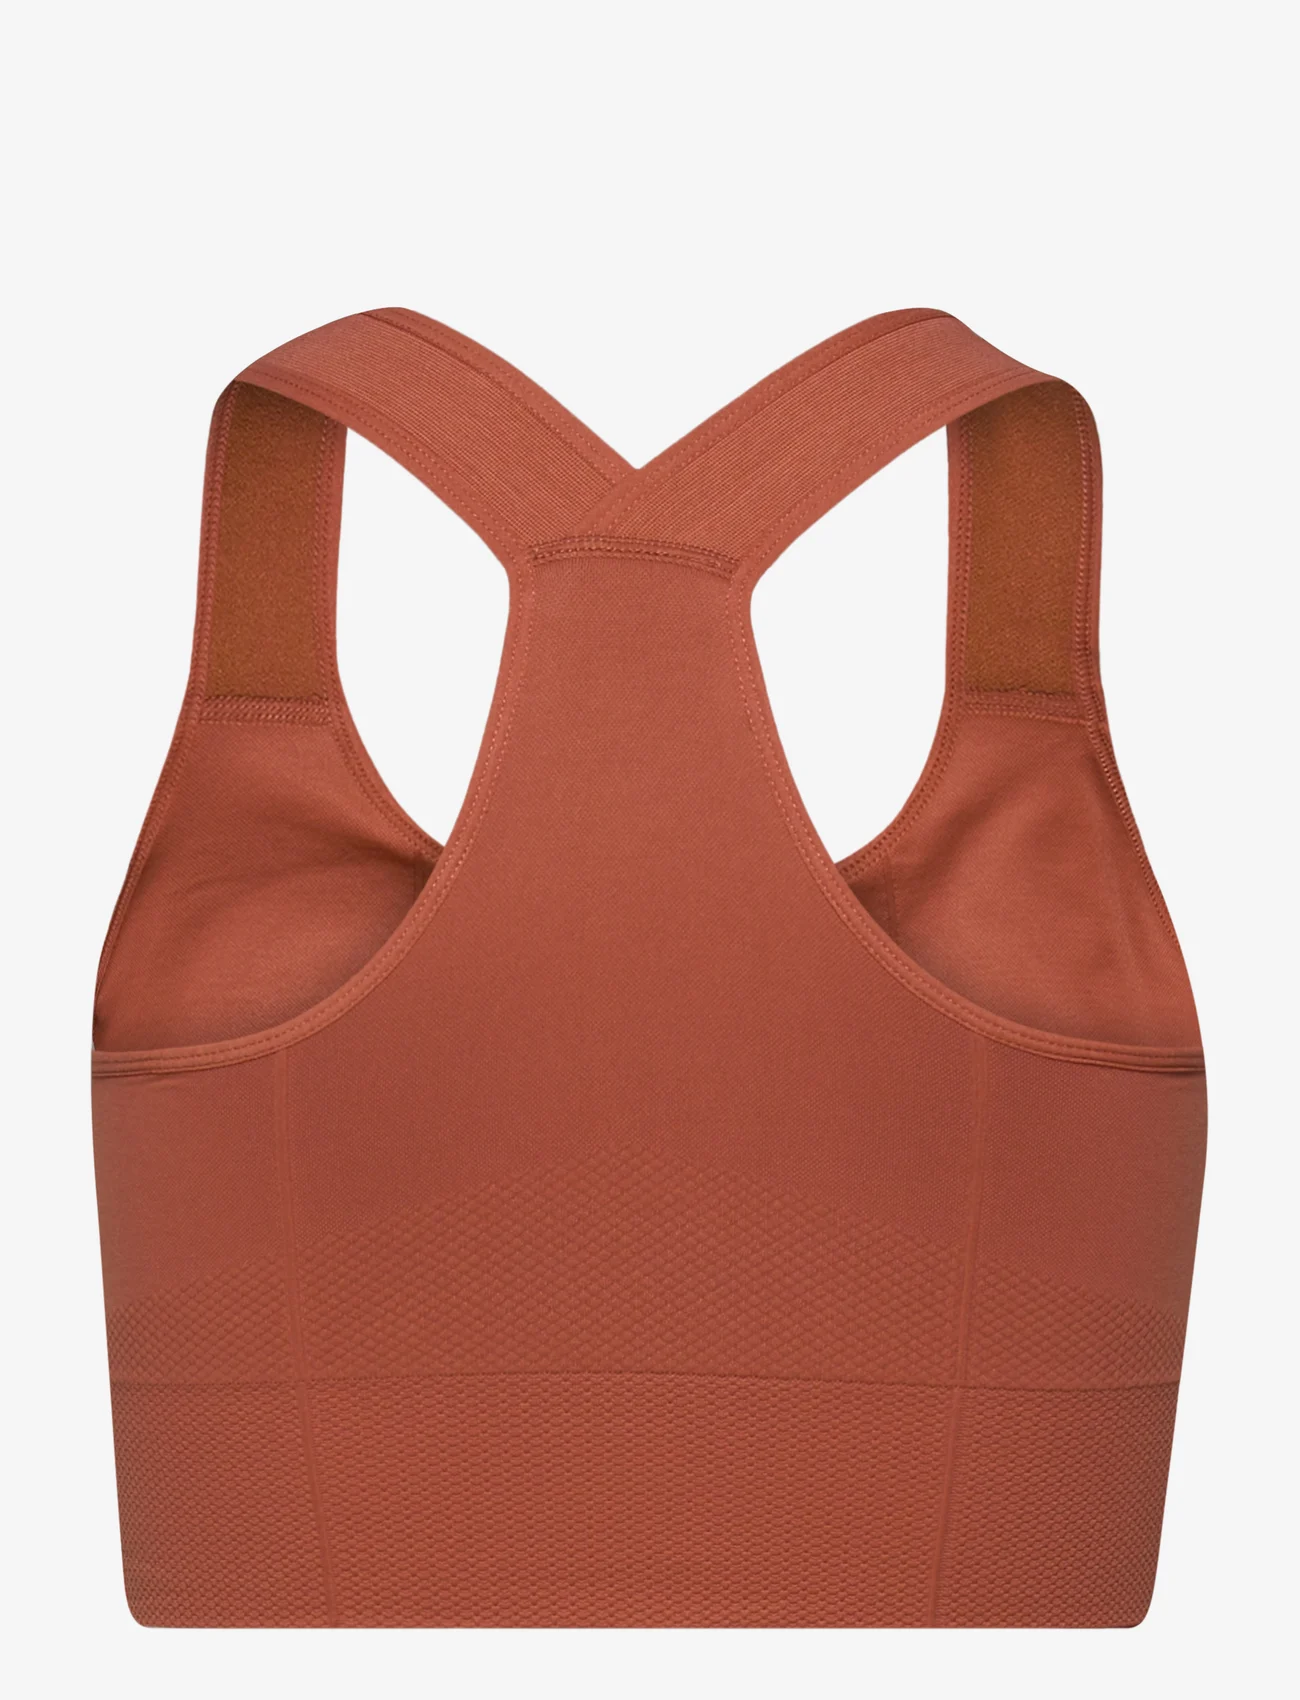 AIM'N - Luxe Seamless High Support Bra - sport bras: high support - rouge - 1